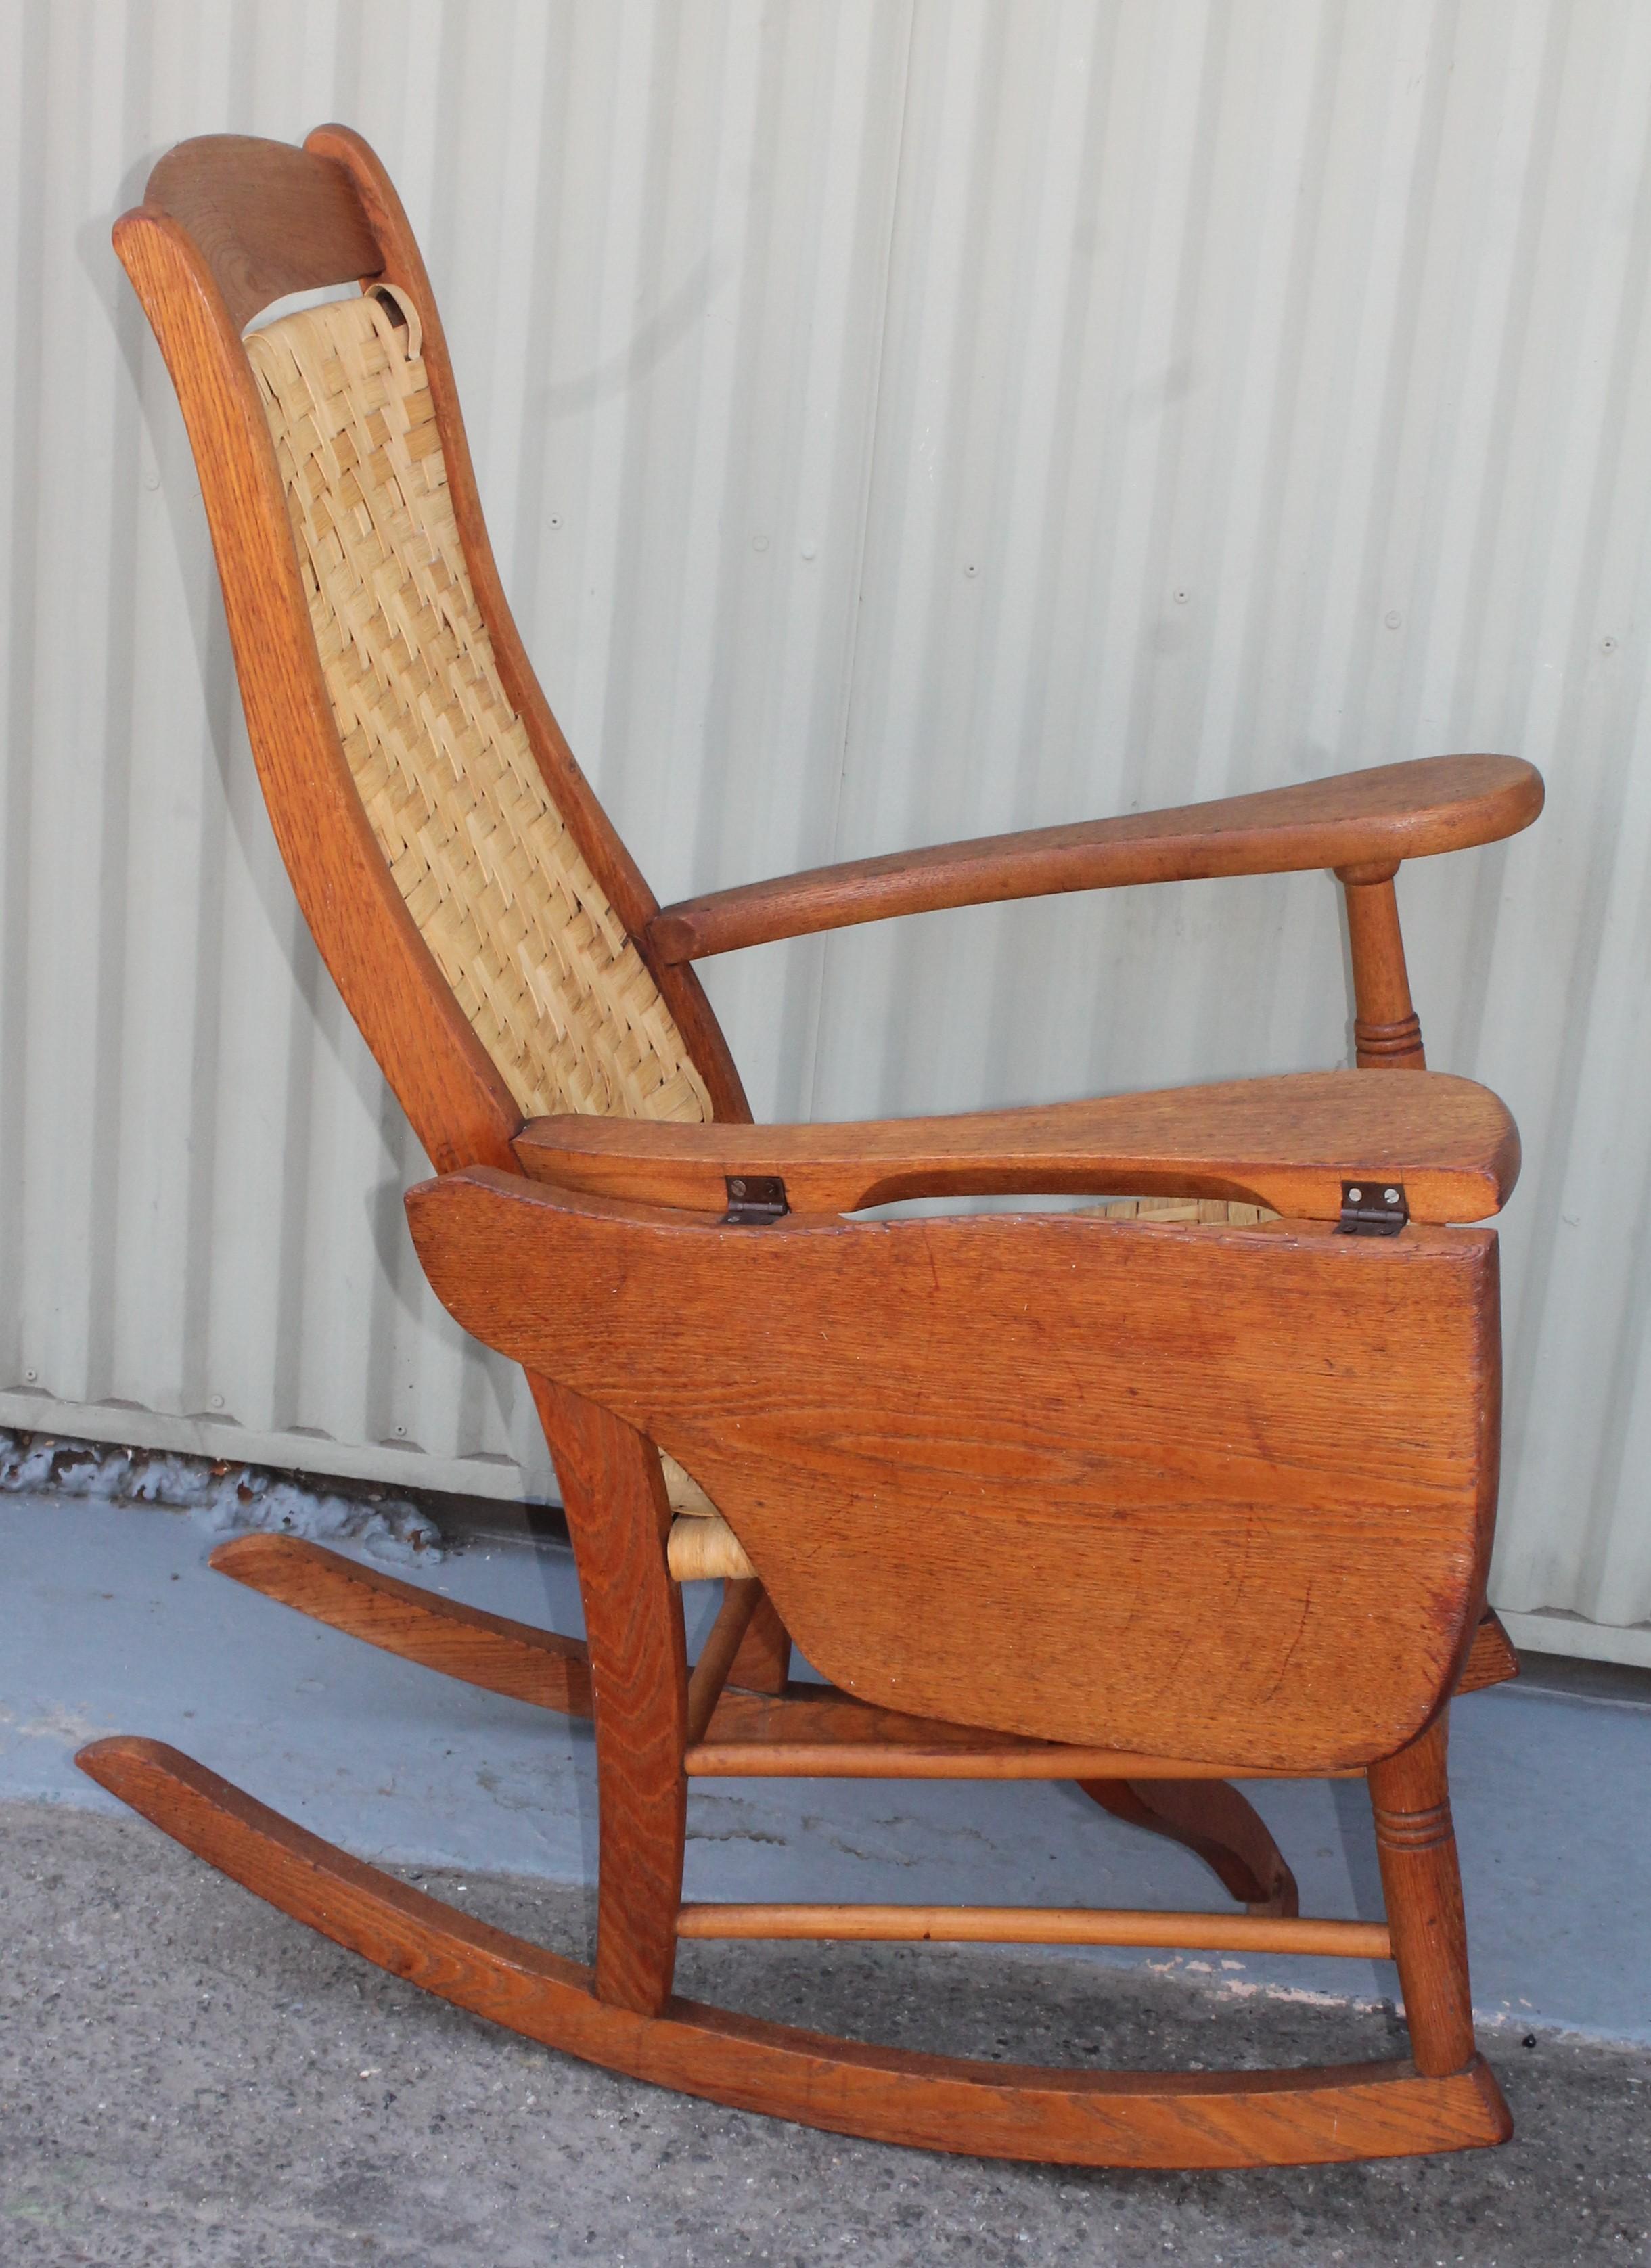 Hand-Crafted Ranch House Rocking Chair